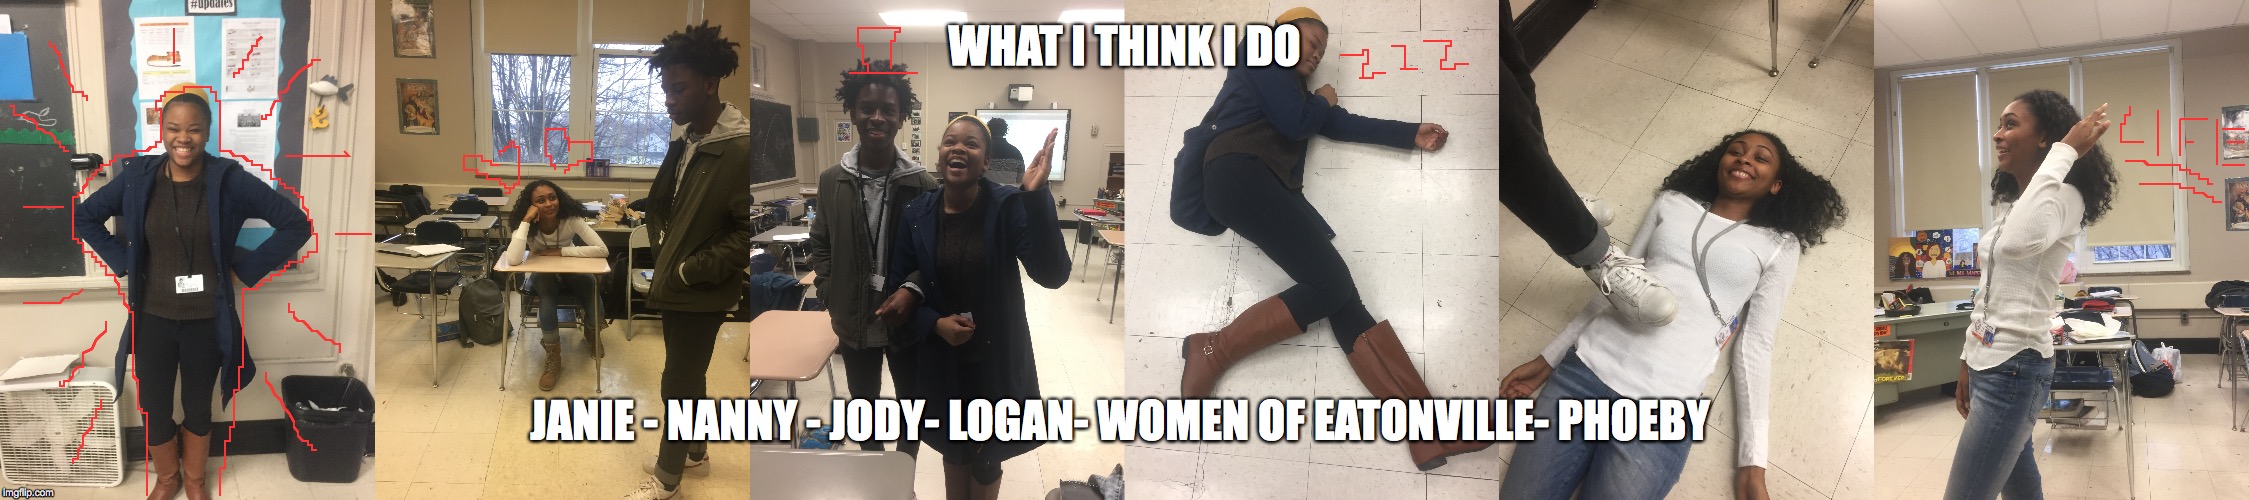 WHAT I THINK I DO; JANIE - NANNY - JODY- LOGAN- WOMEN OF EATONVILLE- PHOEBY | image tagged in project | made w/ Imgflip meme maker